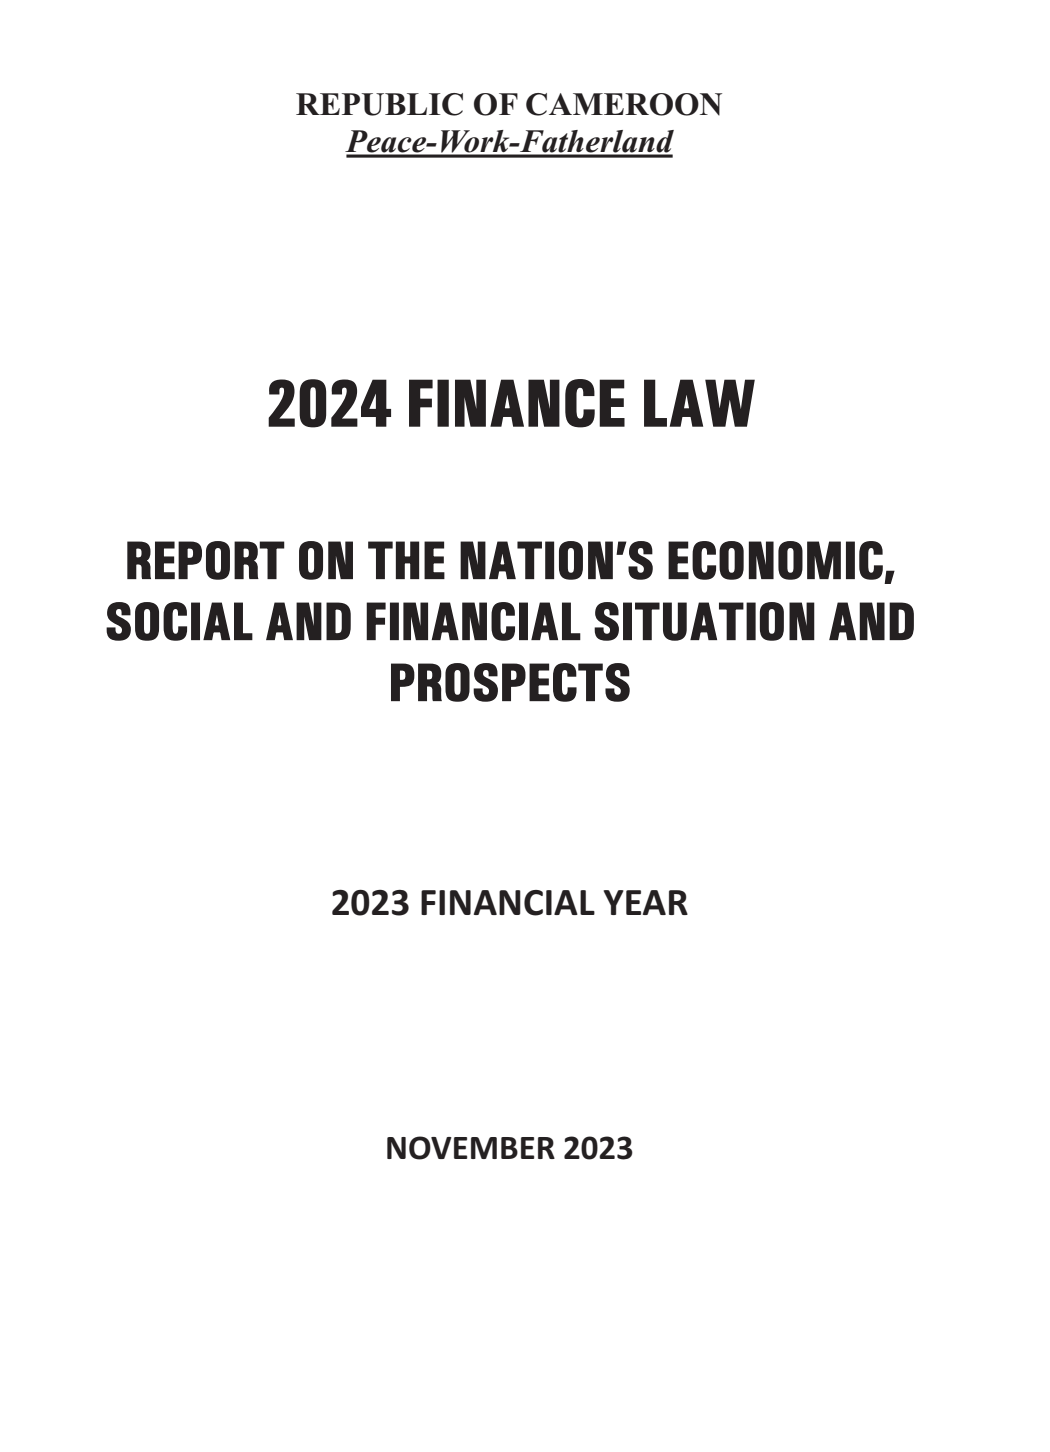 report on the nation's economic, social and financial situation and prospects 2023 financial year